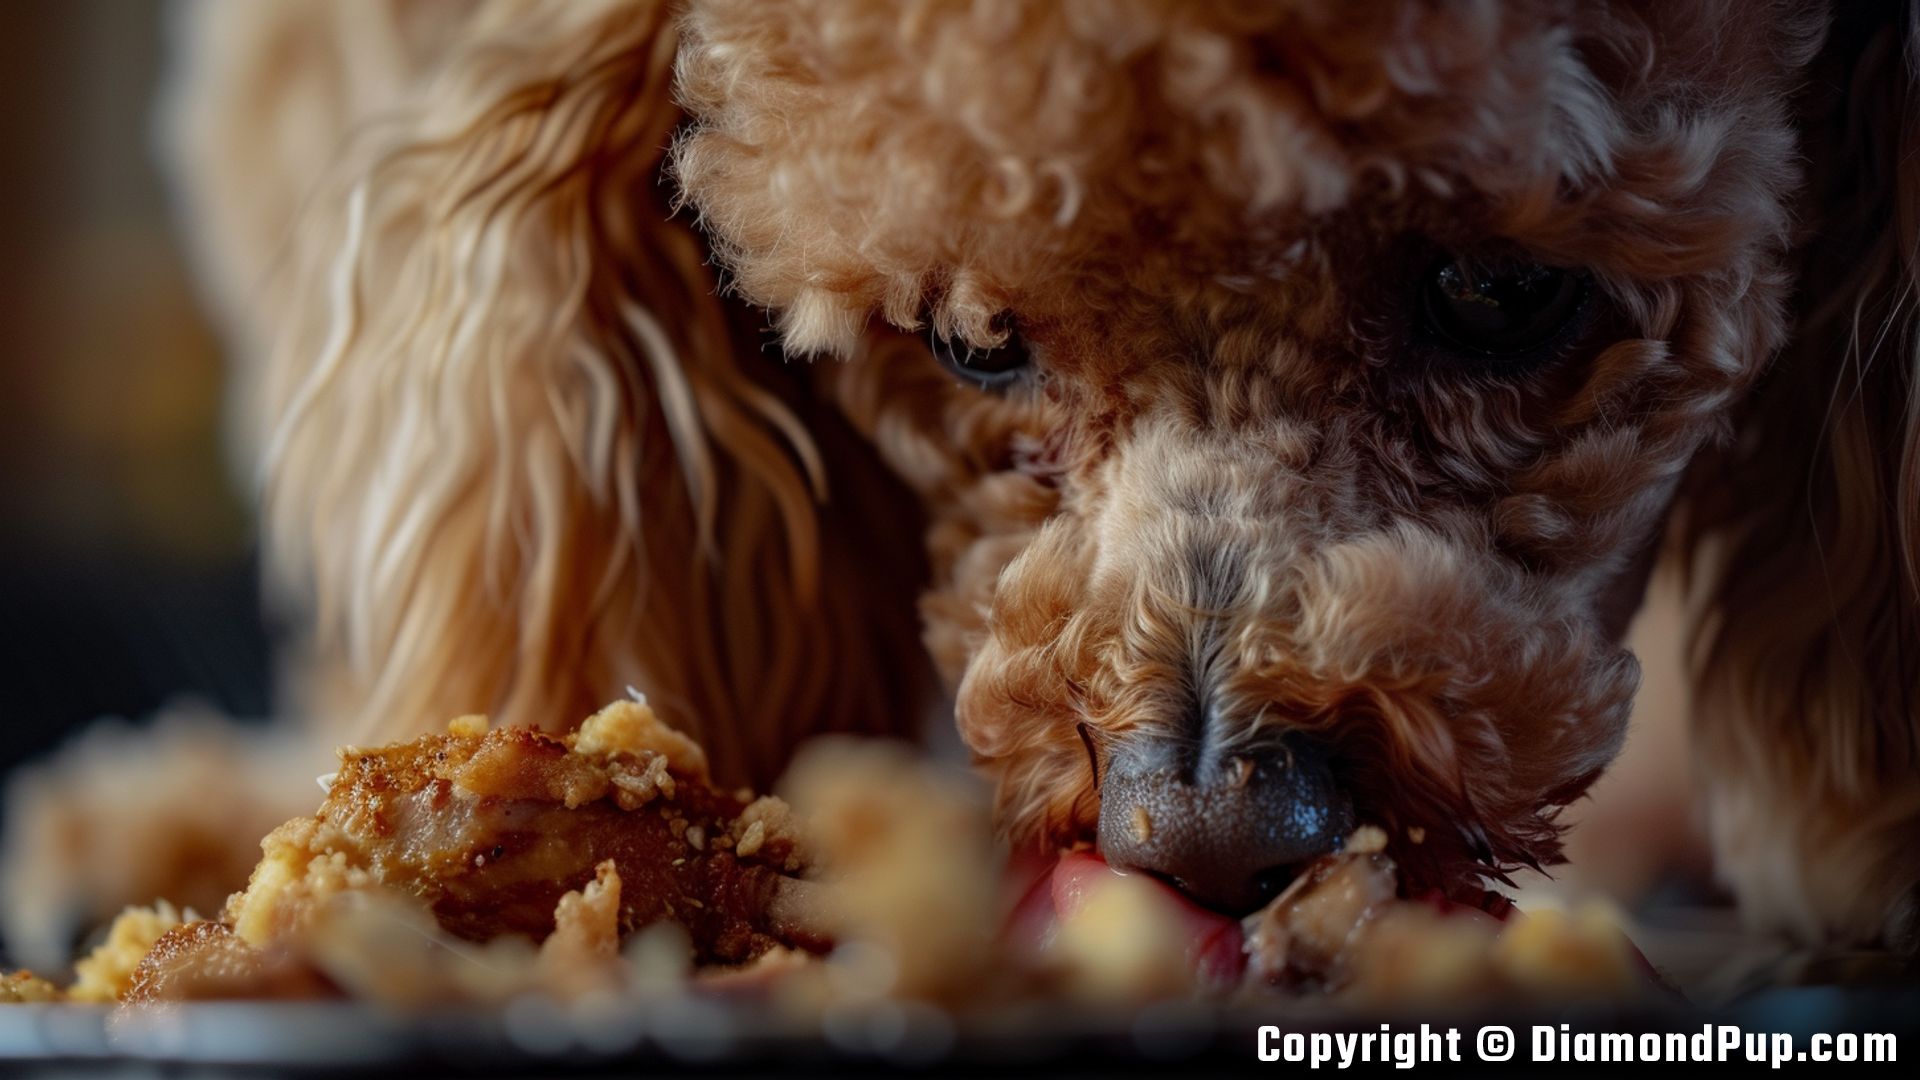 Photo of a Cute Poodle Eating Chicken